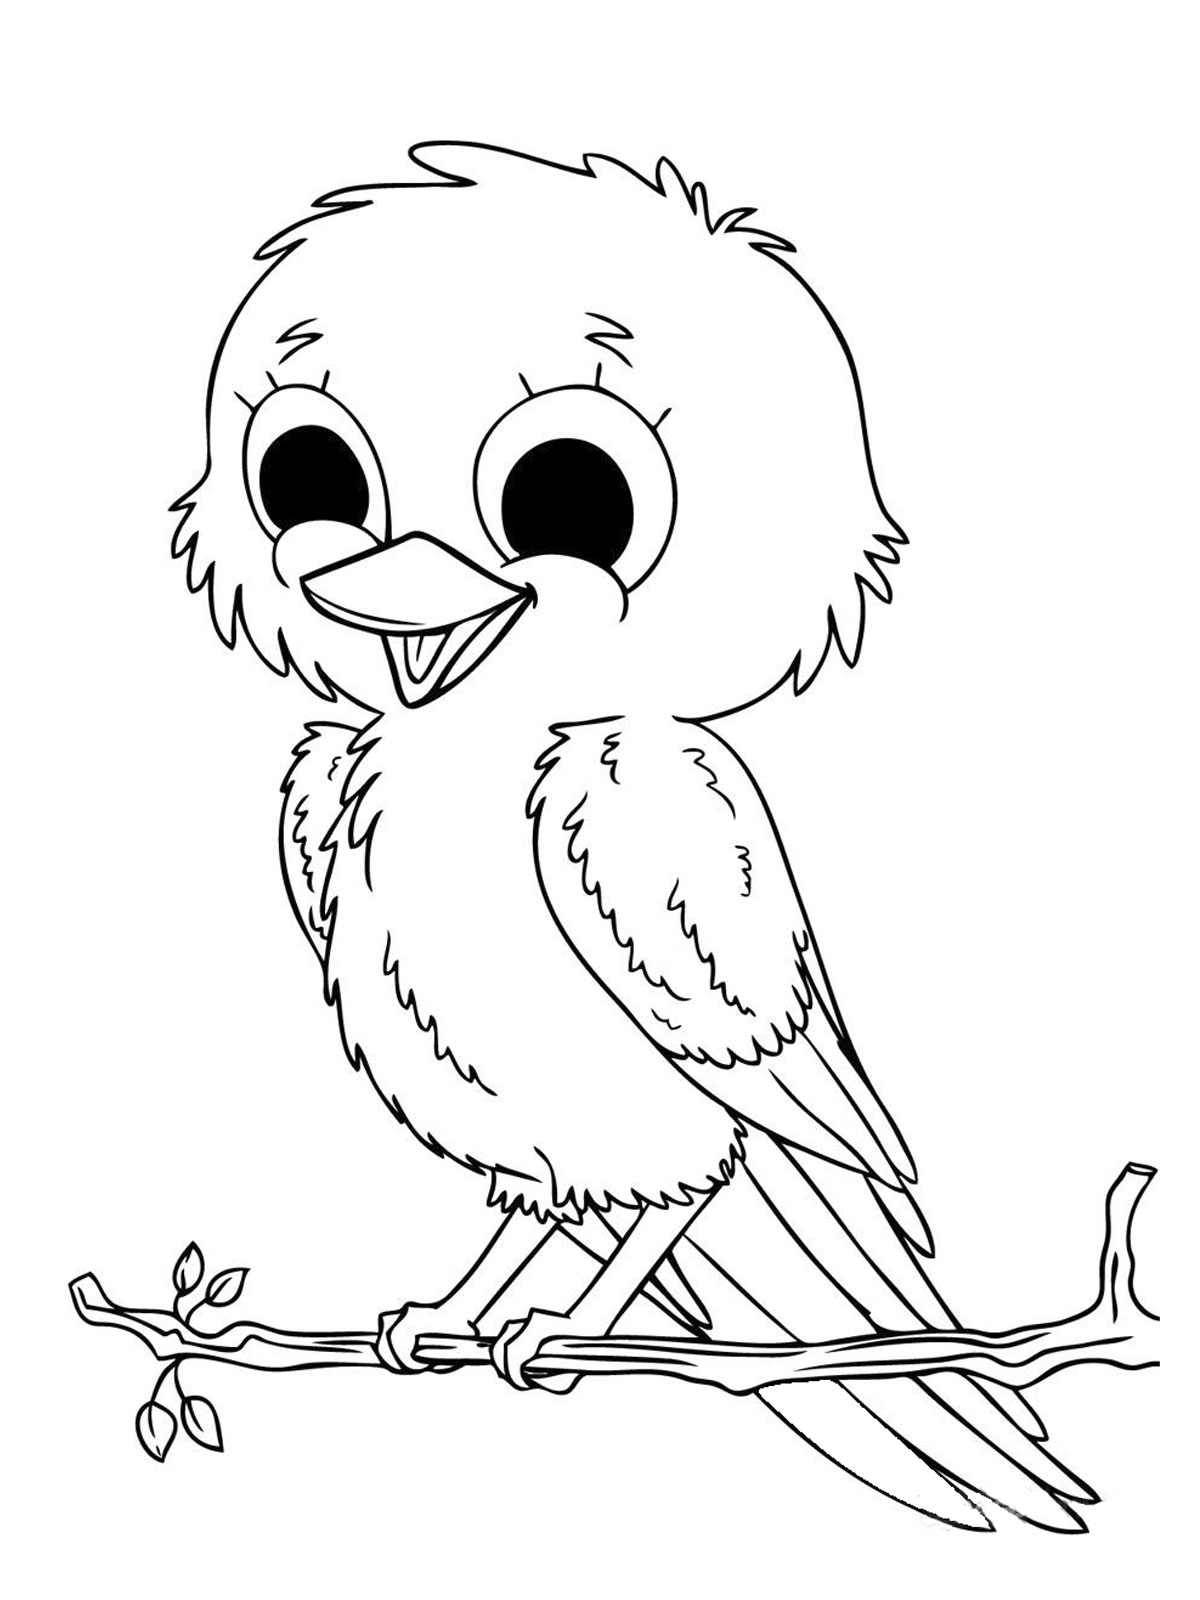 Baby Animal Coloring Pages Realistic Coloring Pages Coloring Wallpapers Download Free Images Wallpaper [coloring654.blogspot.com]